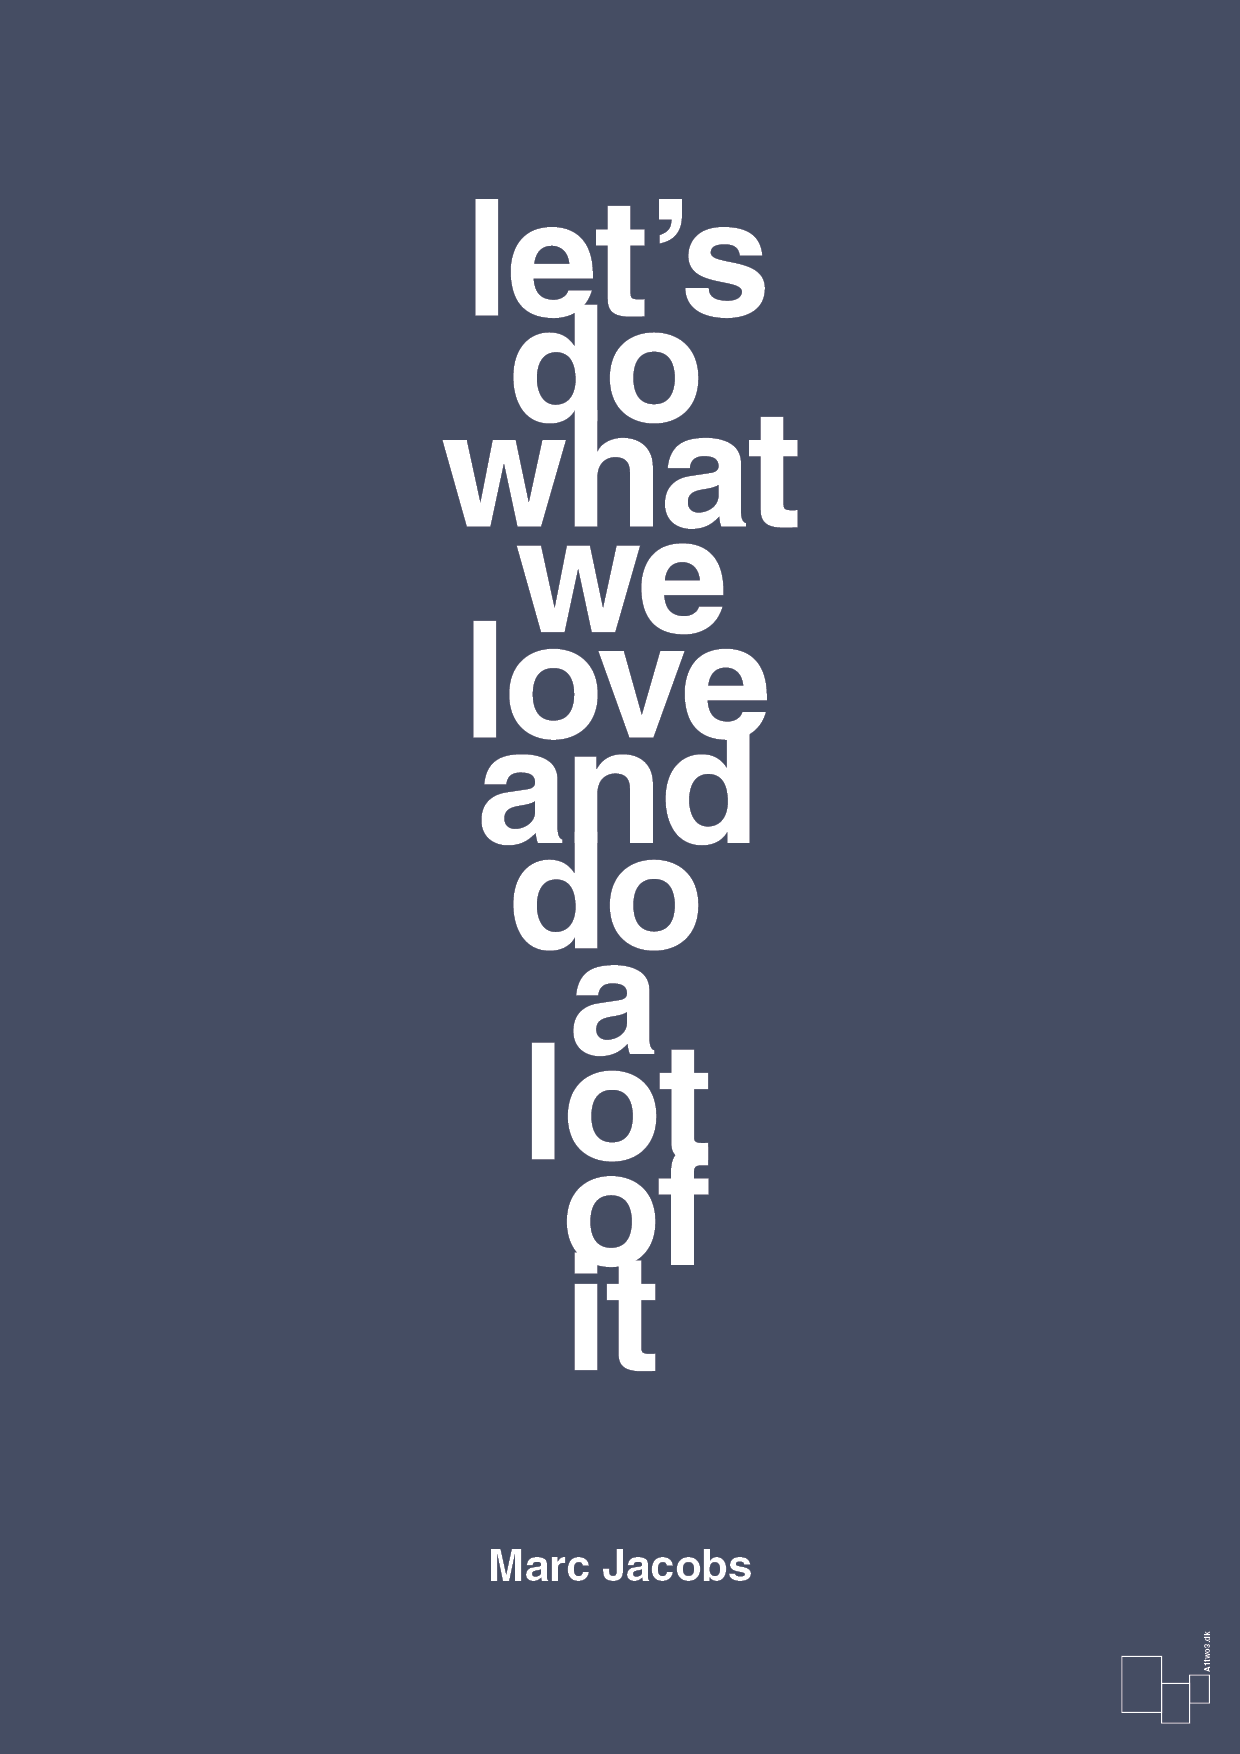 lets do what we love and do a lot of it - Plakat med Citater i Petrol